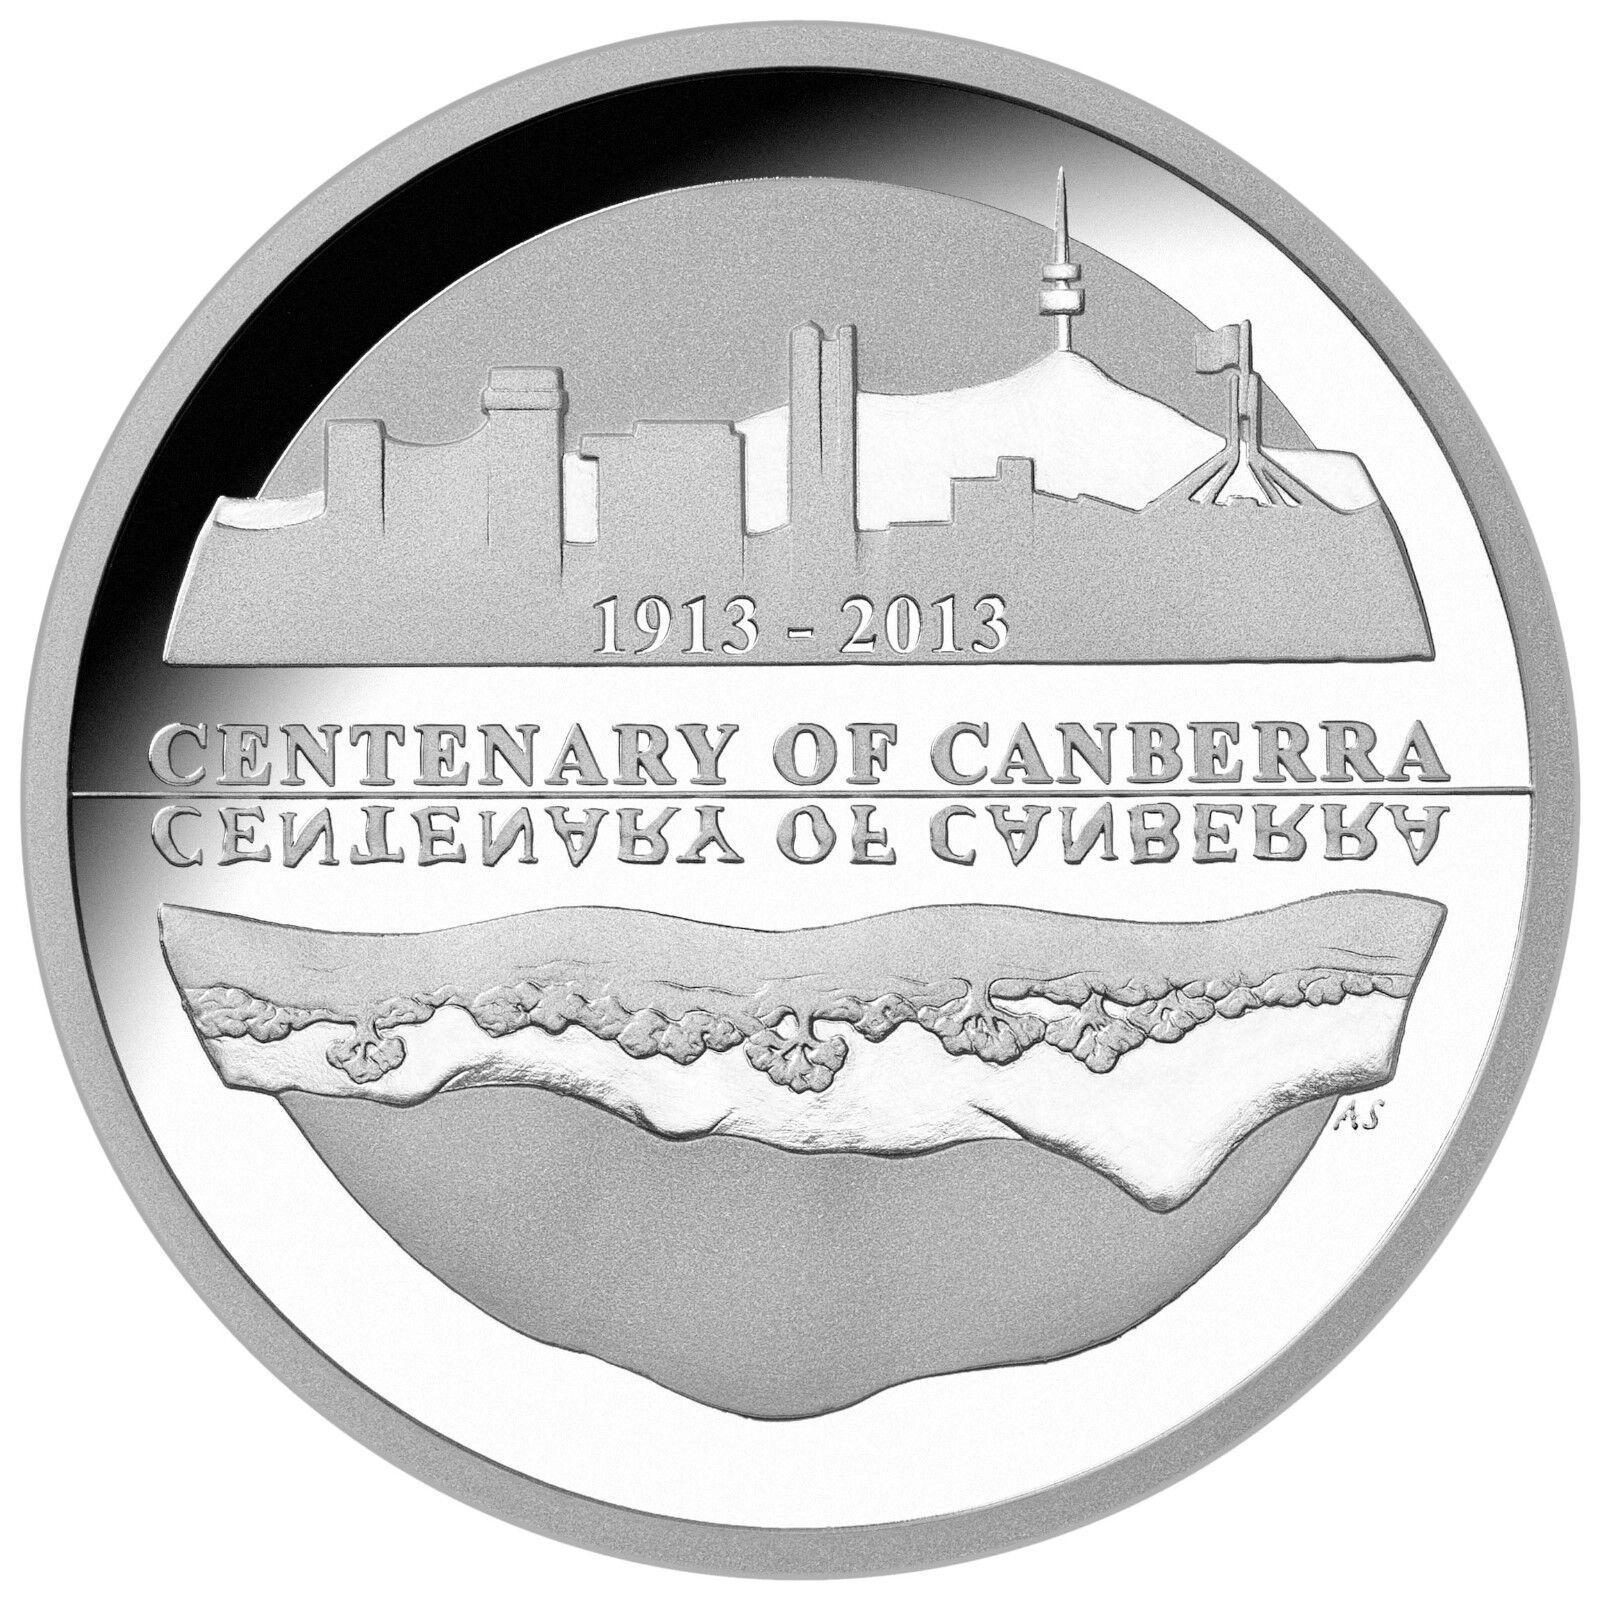 2013 Centenary of Canberra, 31.6g Silver Proof $5 Coin, RAM